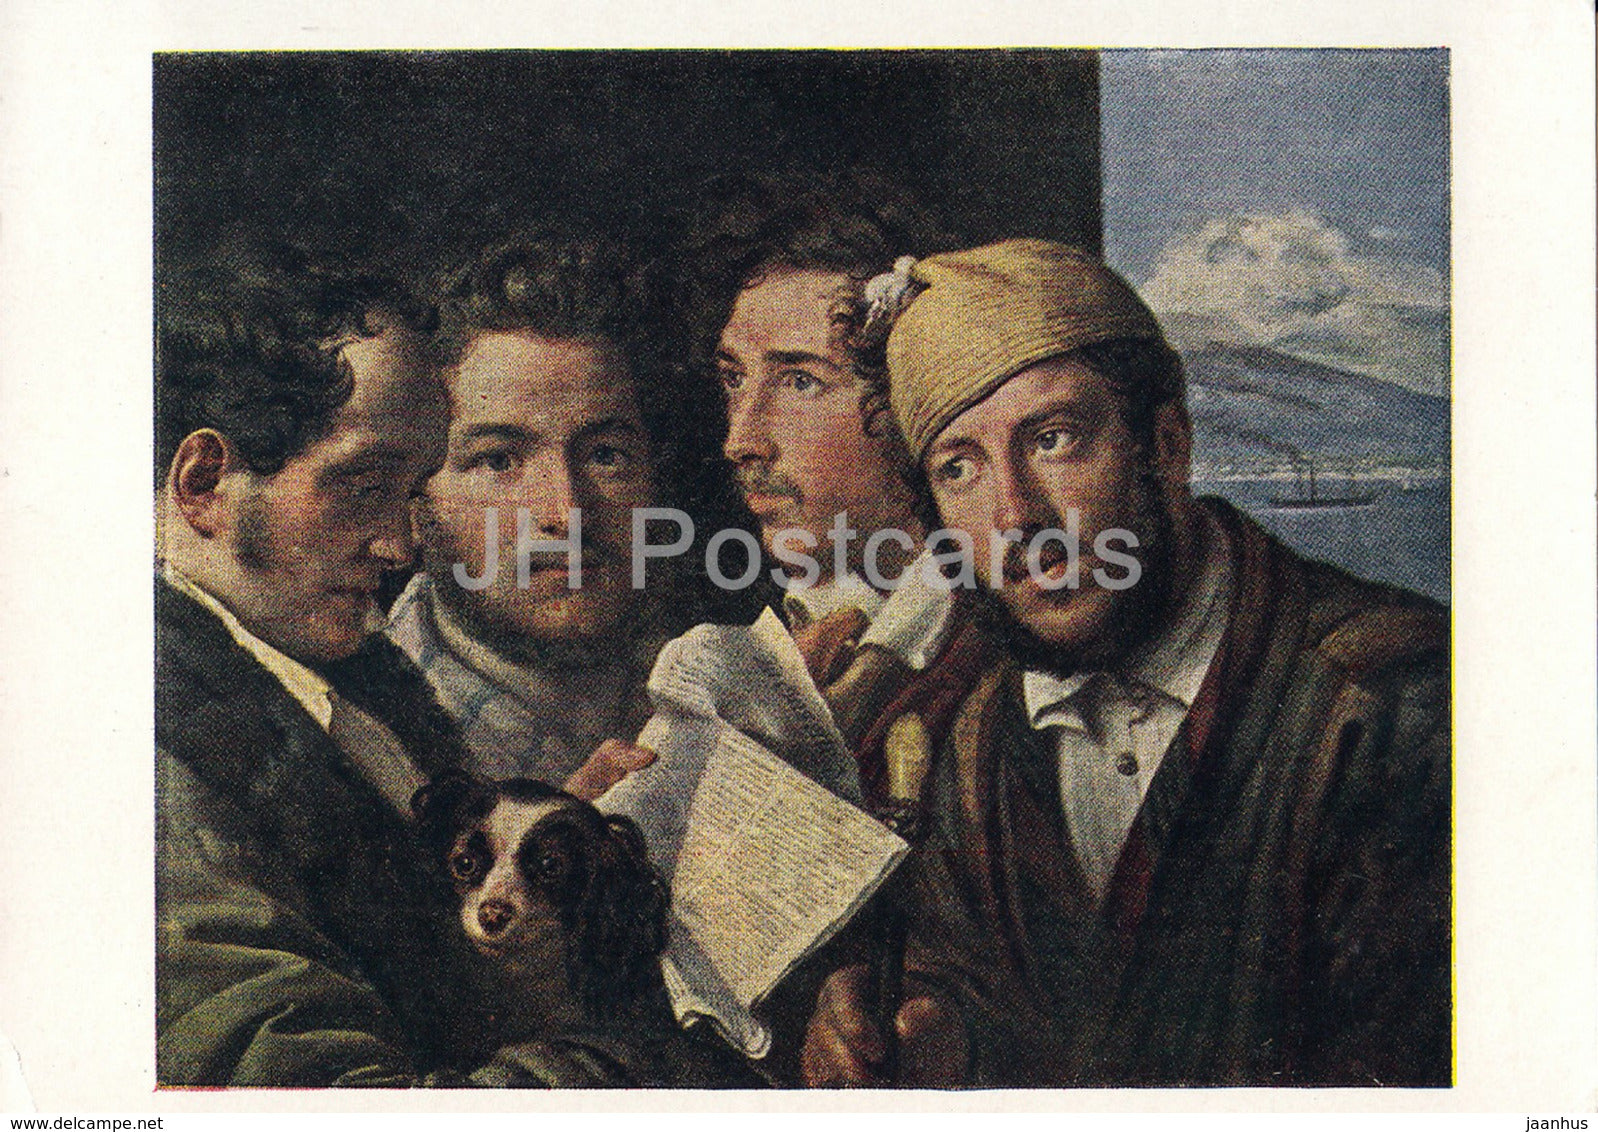 painting by O. Kiprensky - Reading Newspaper in Naples Napoli - dog - Russian art - 1963 - Russia USSR - unused - JH Postcards